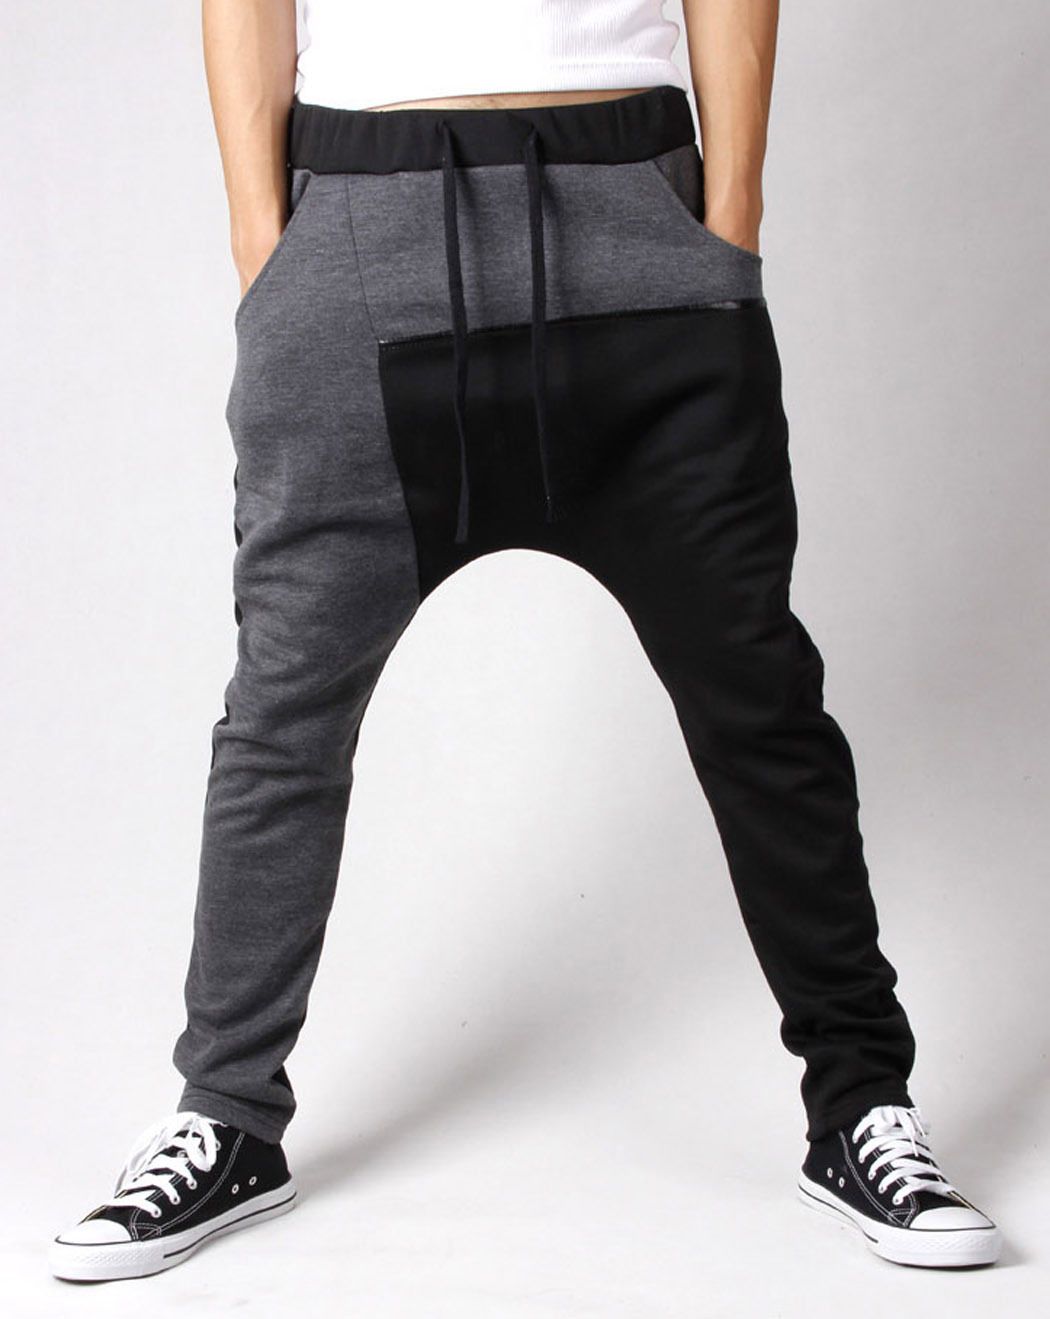 Wholesale Mens Pants At $19.43, Get Details About Mens Casual Sports ...